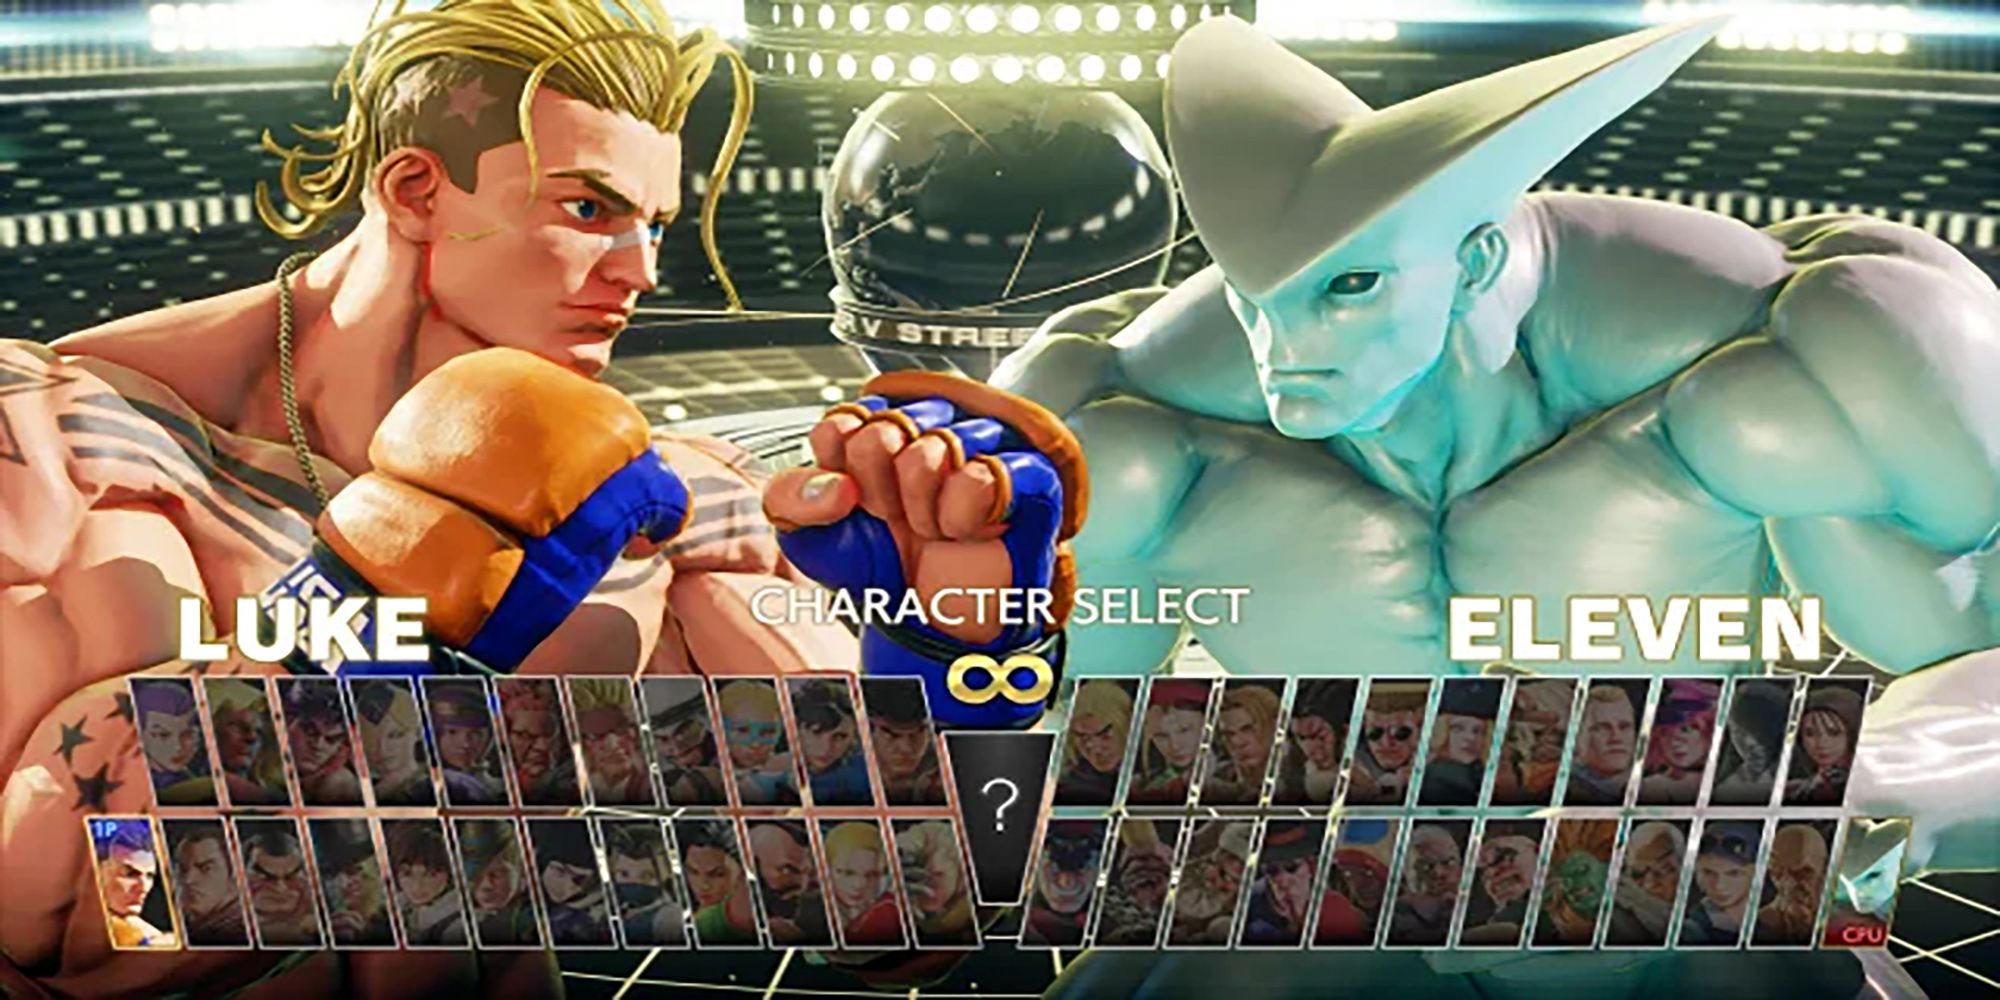 The newest street fighter Luke, and Twelve's ancestor, Eleven, face off in the Street Fighter 5 Character Select screen.